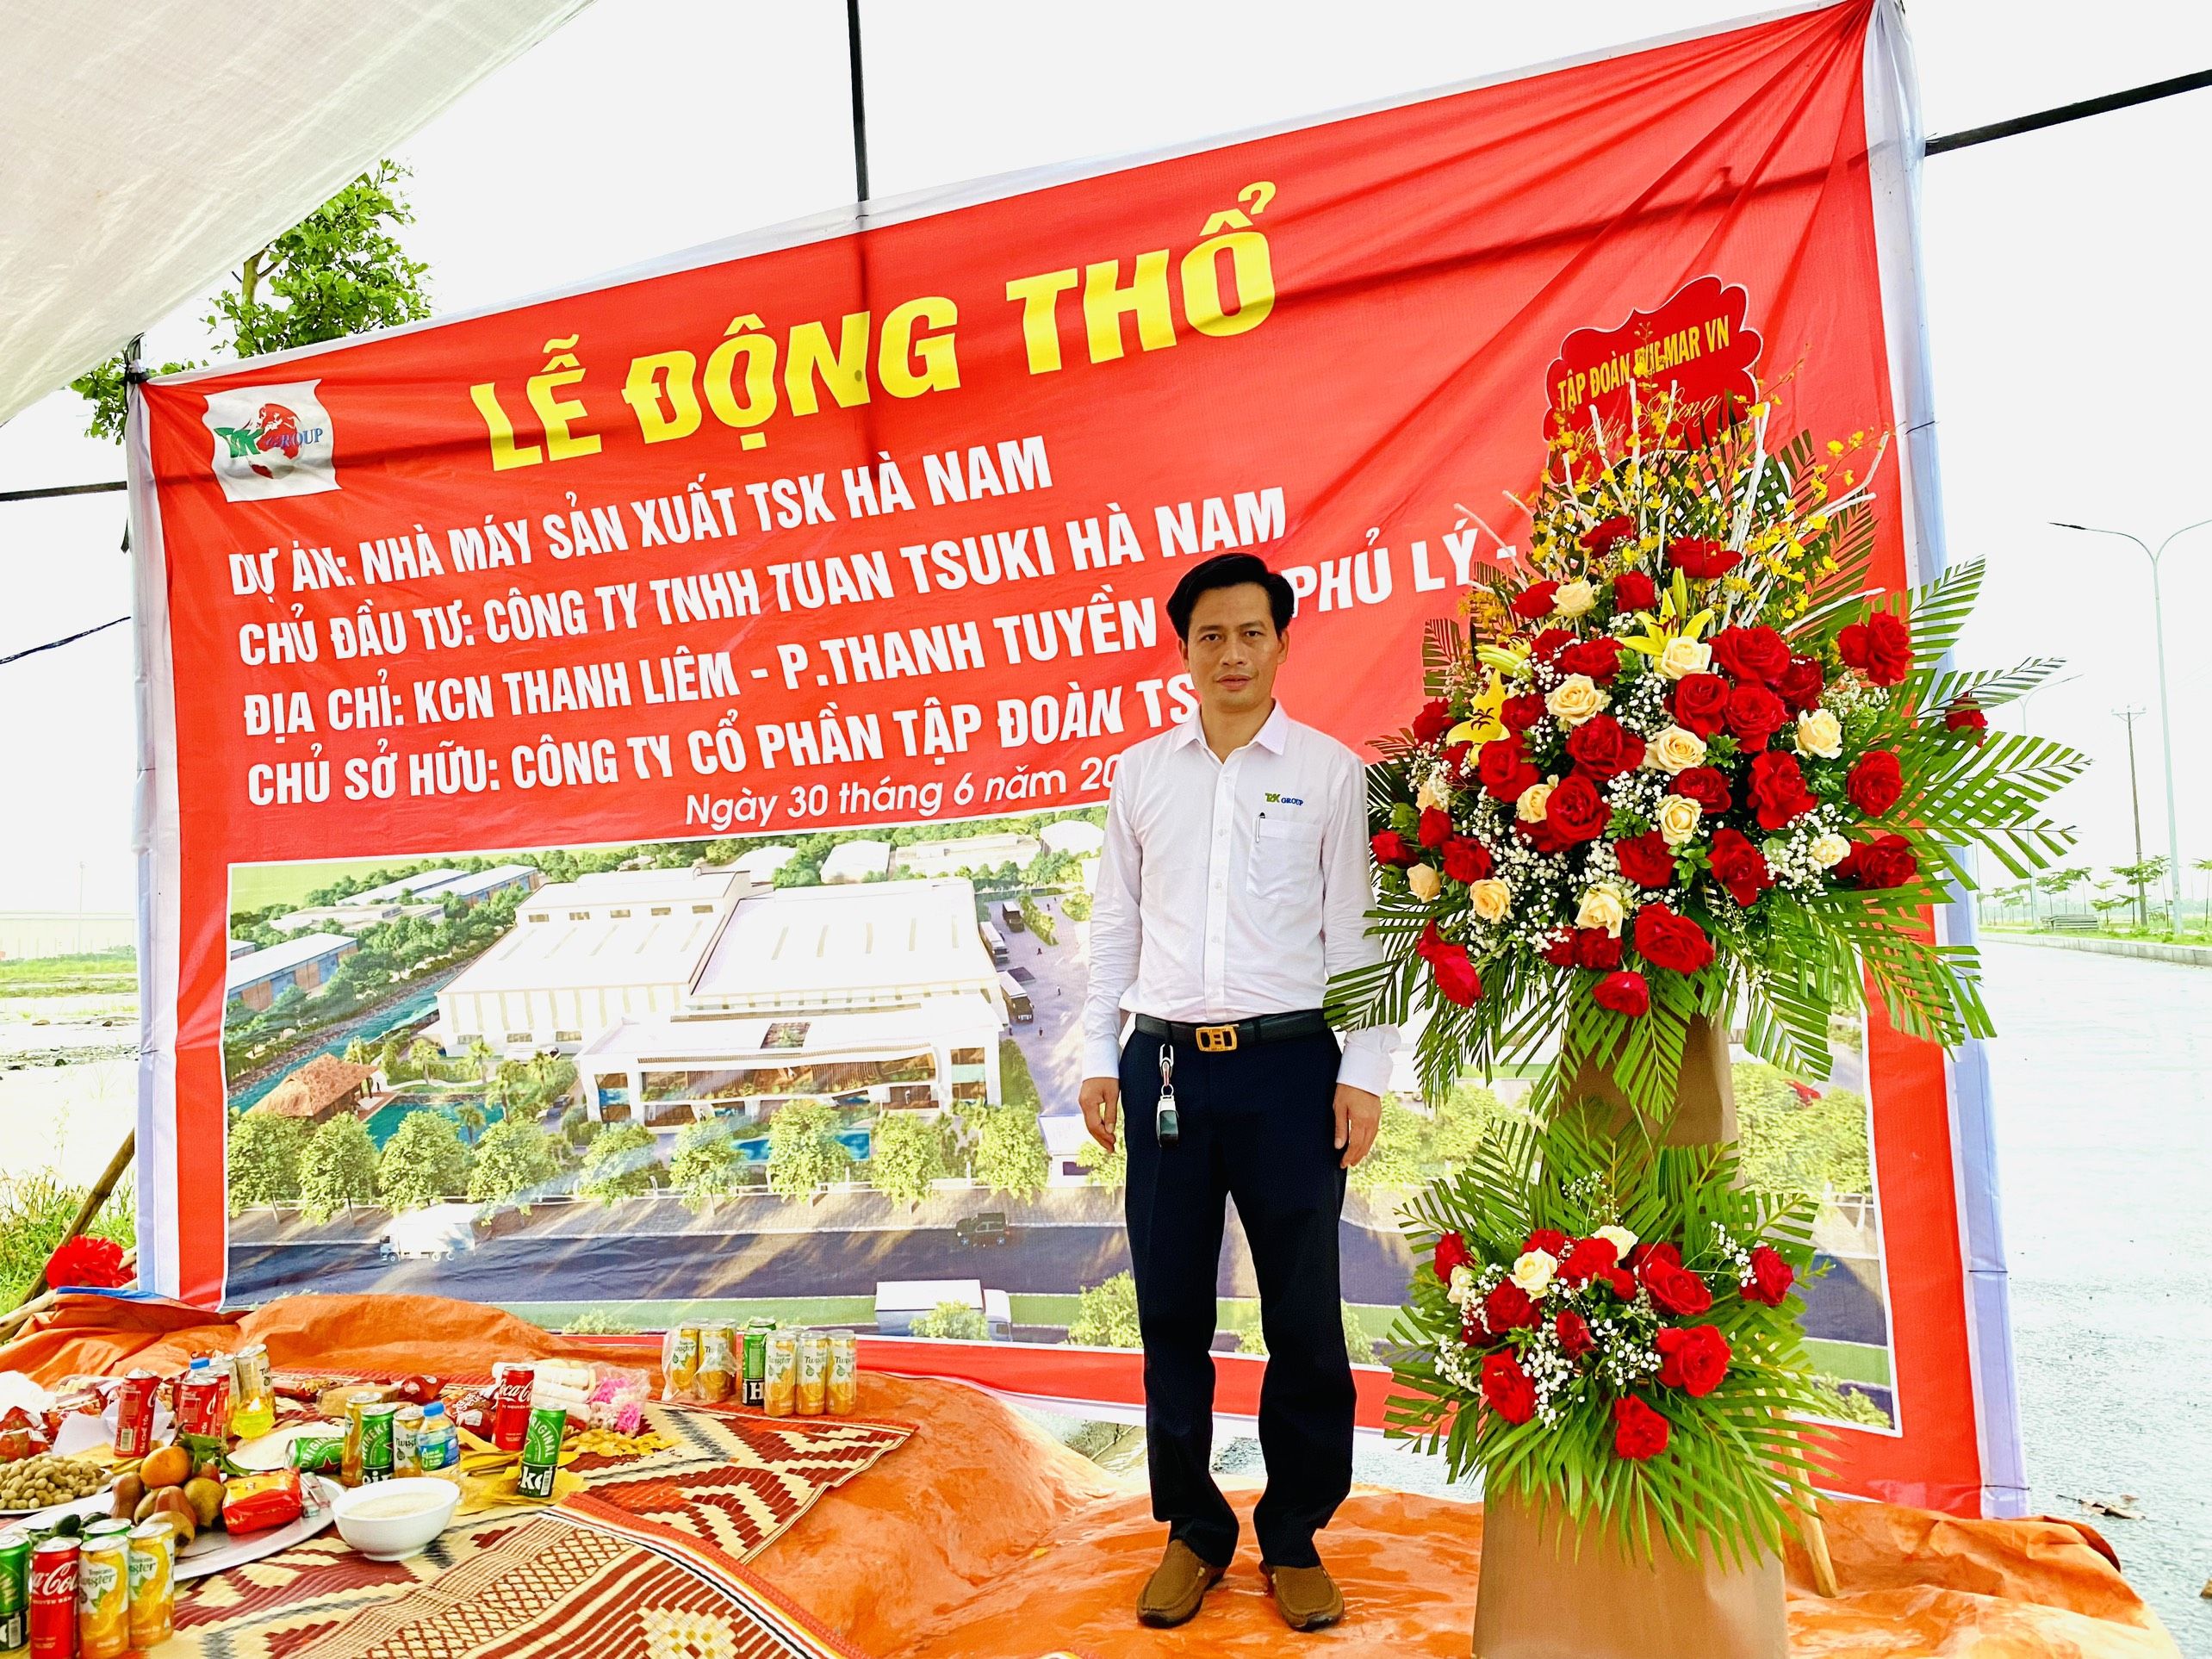 GROUNDBREAKING CEREMONY FOR 02 NEW FACTORIES IN THANH LIEM INDUSTRIAL ZONE, HA NAM PROVINCE